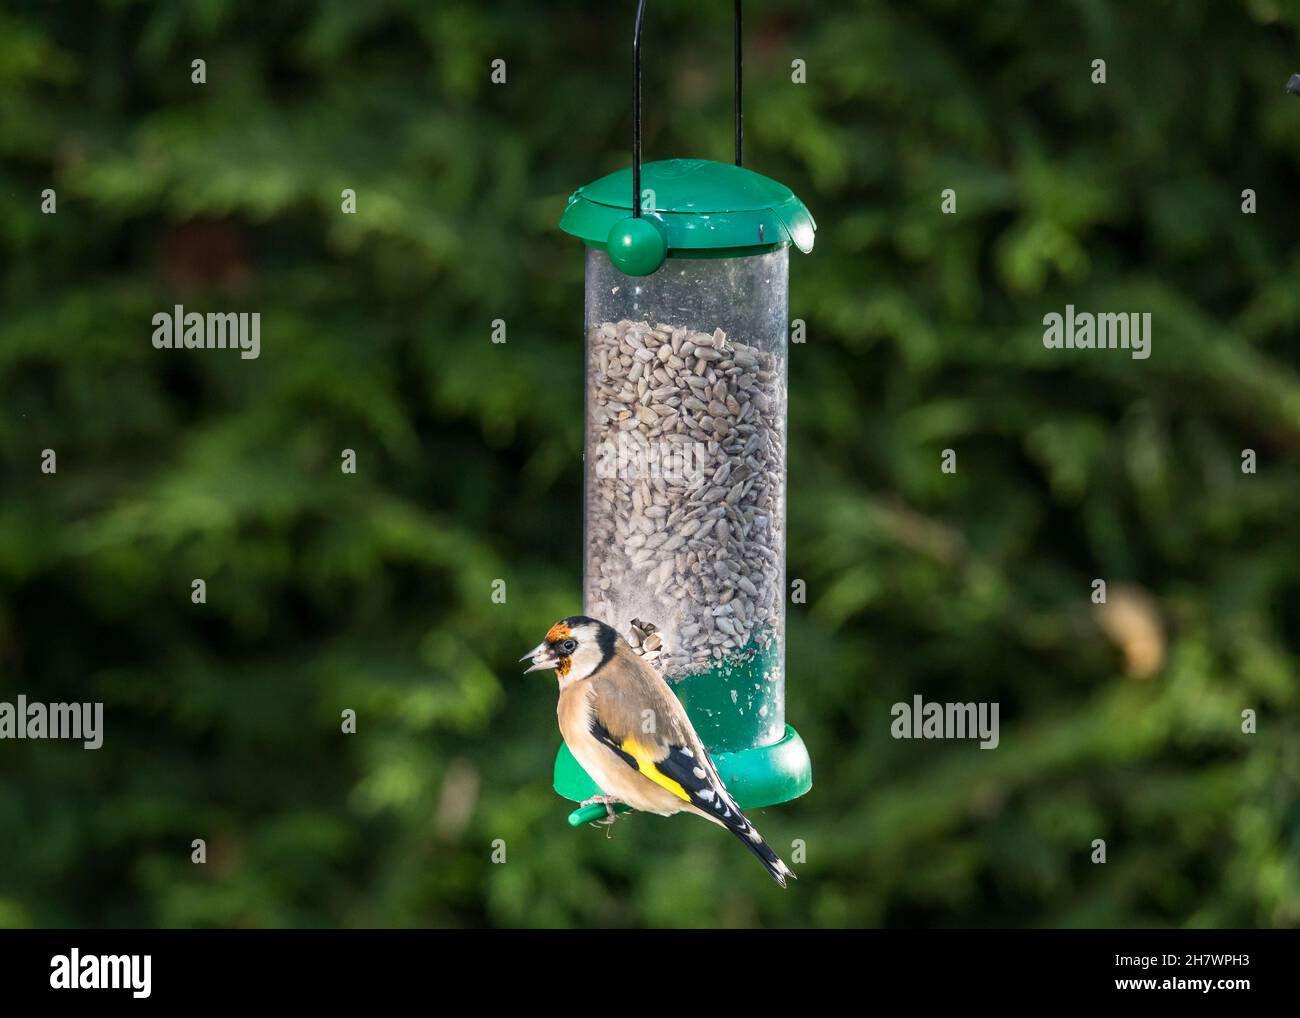 Carrigaline, Cork, Ireland. 25th November, 2021. On a cold frosty morning a Goldfinch eating some seed from a feeder in a garden in Carrigaline, Co. Cork, Ireland. - Credit; David Creedon / Alamy Live News Stock Photo